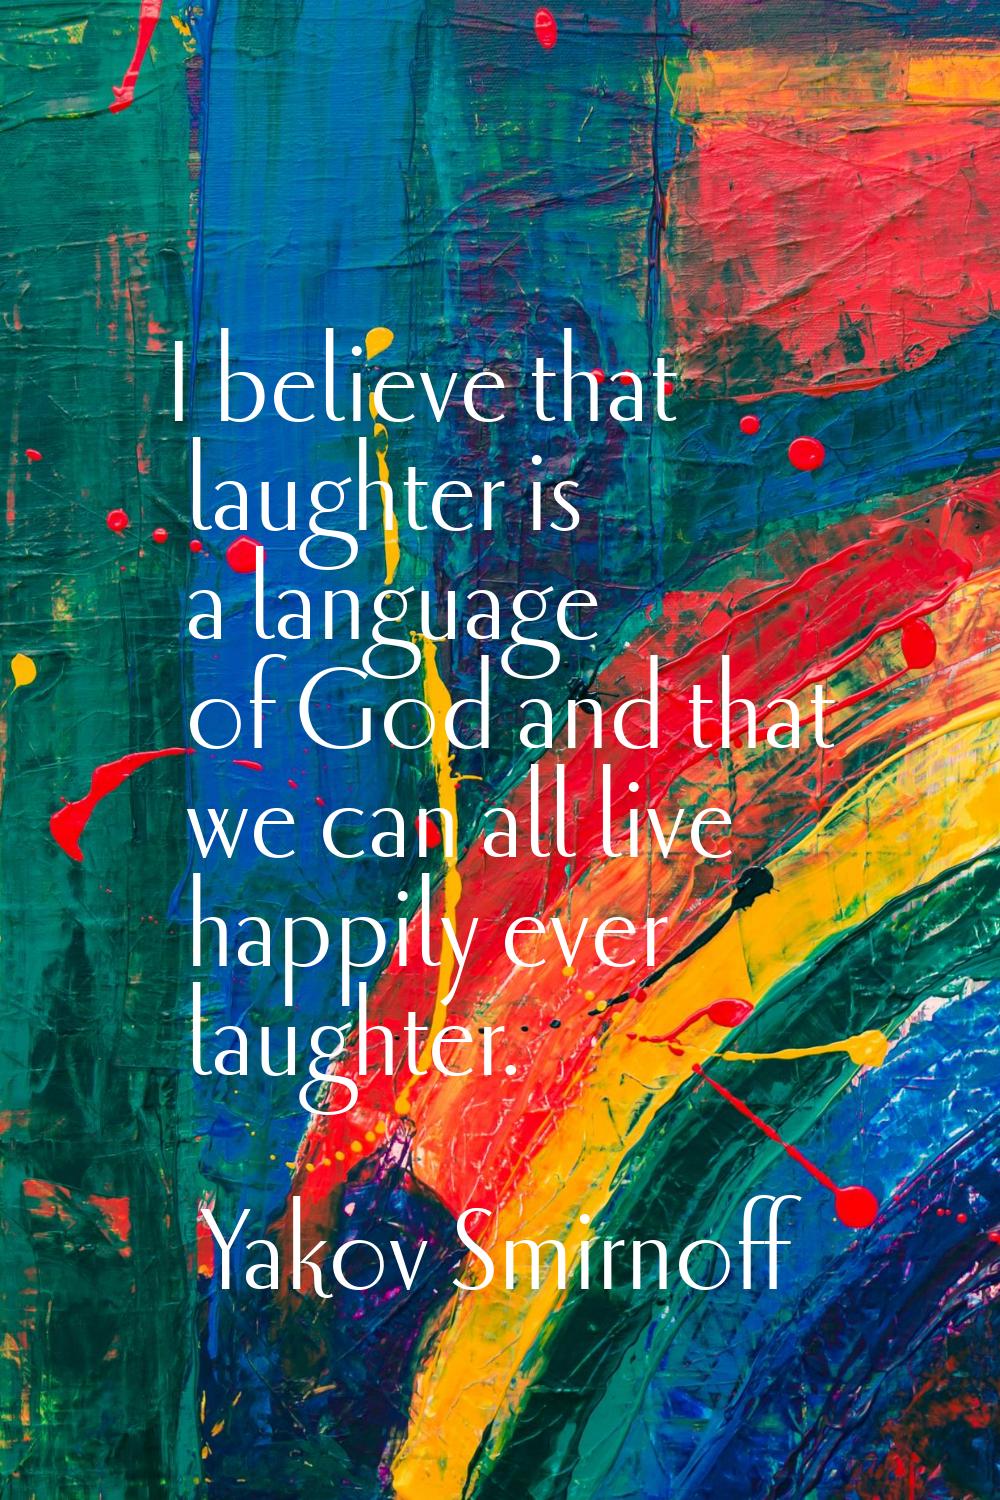 I believe that laughter is a language of God and that we can all live happily ever laughter.